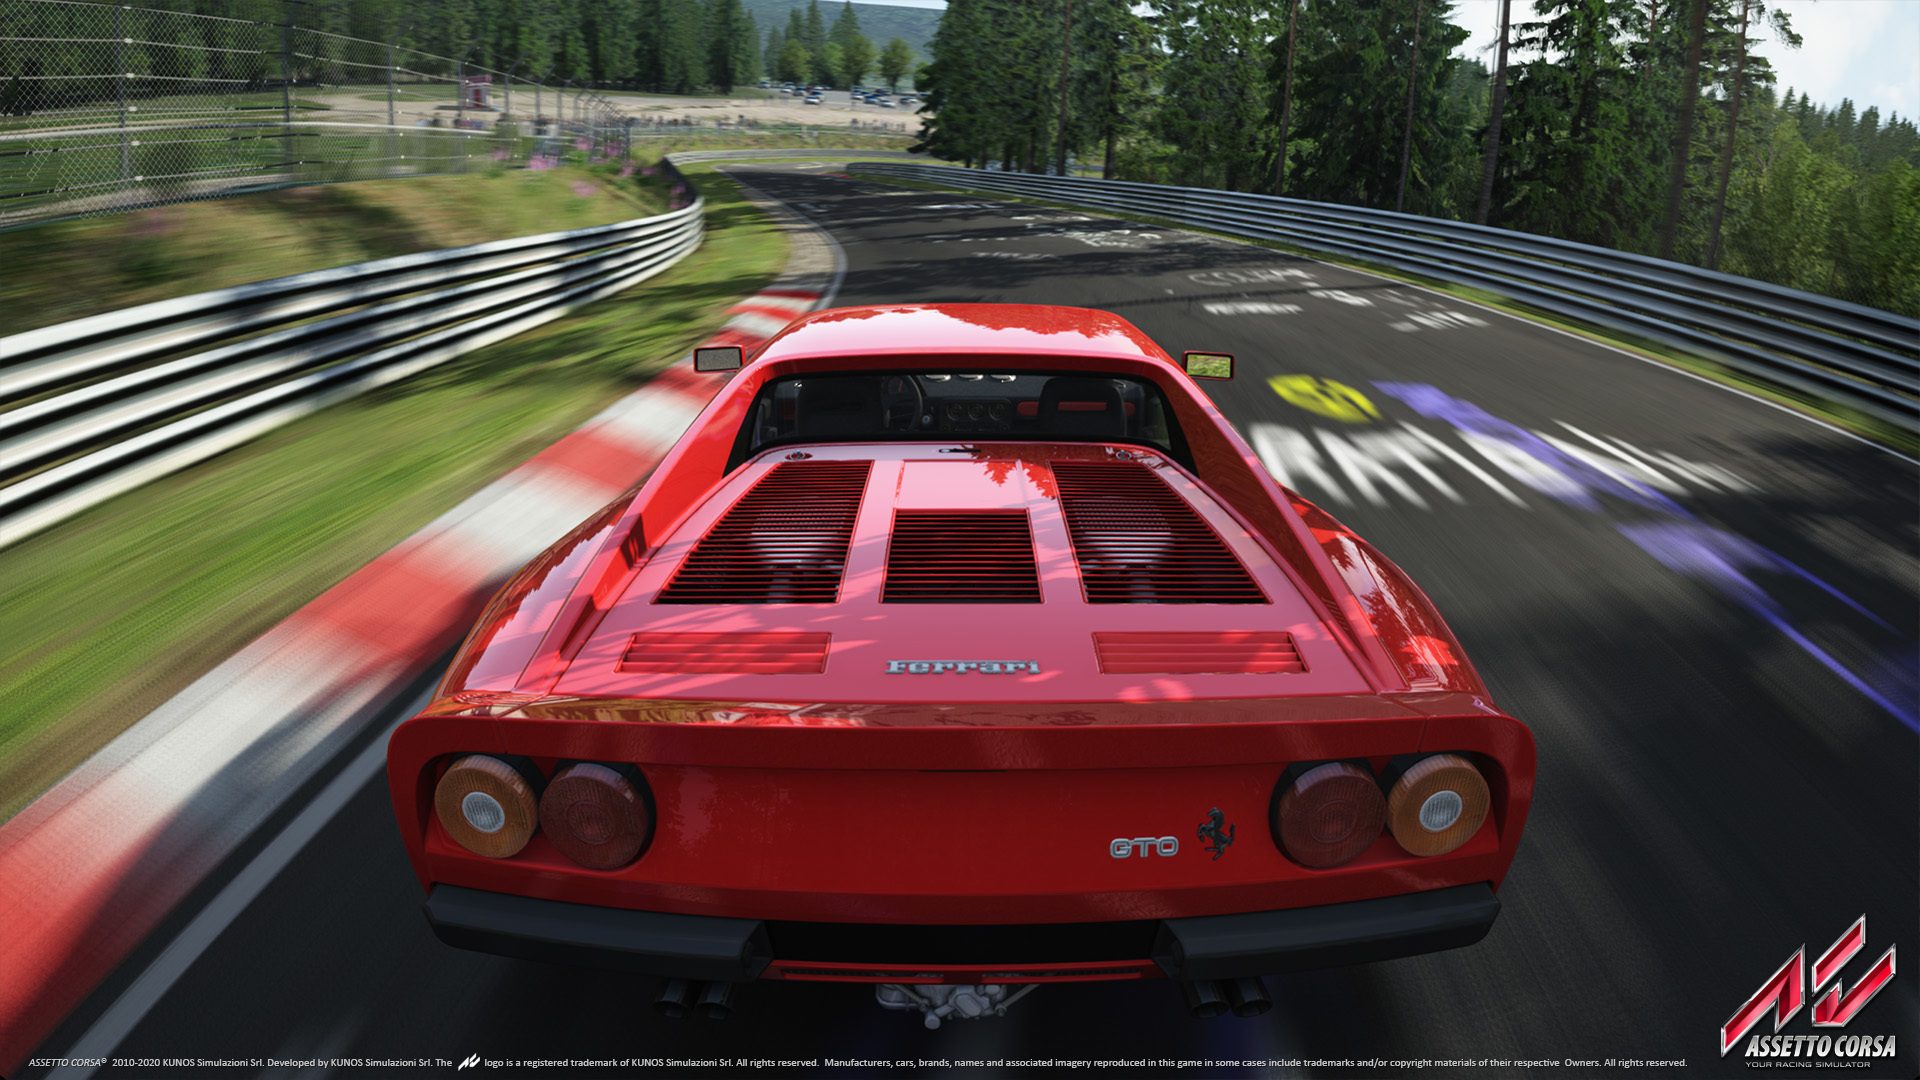 Assetto Corsa (PS4) Game Details